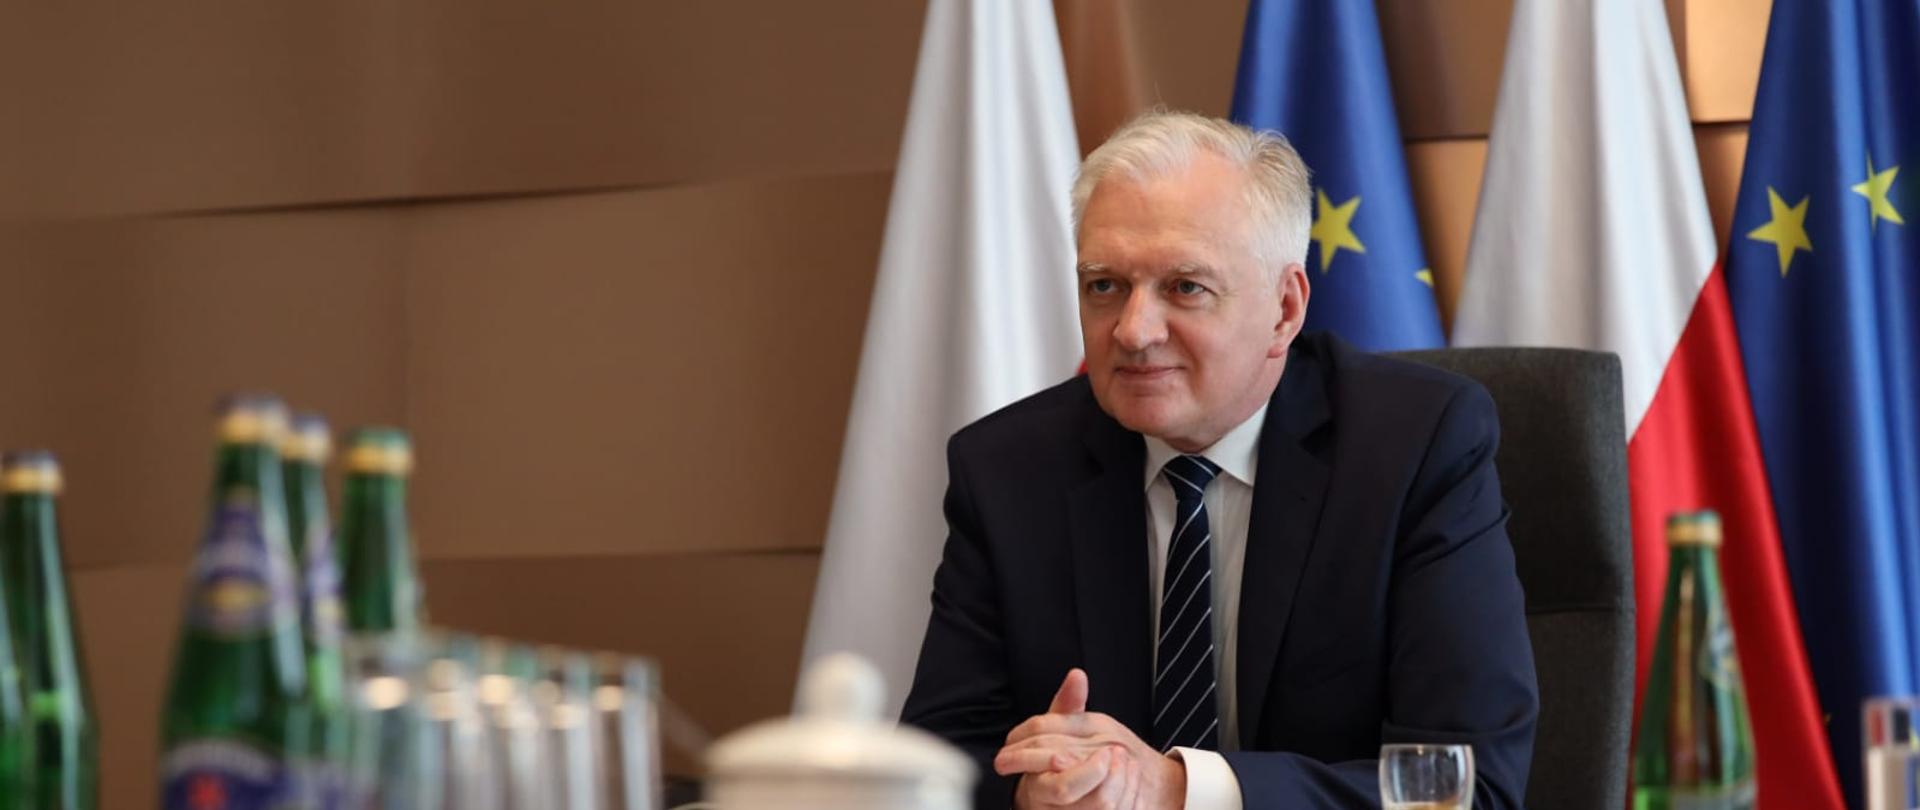 Deputy Prime Minister Jarosław Gowid during the videoconference. He sits at the table. Polish and European Union Flags in the background.